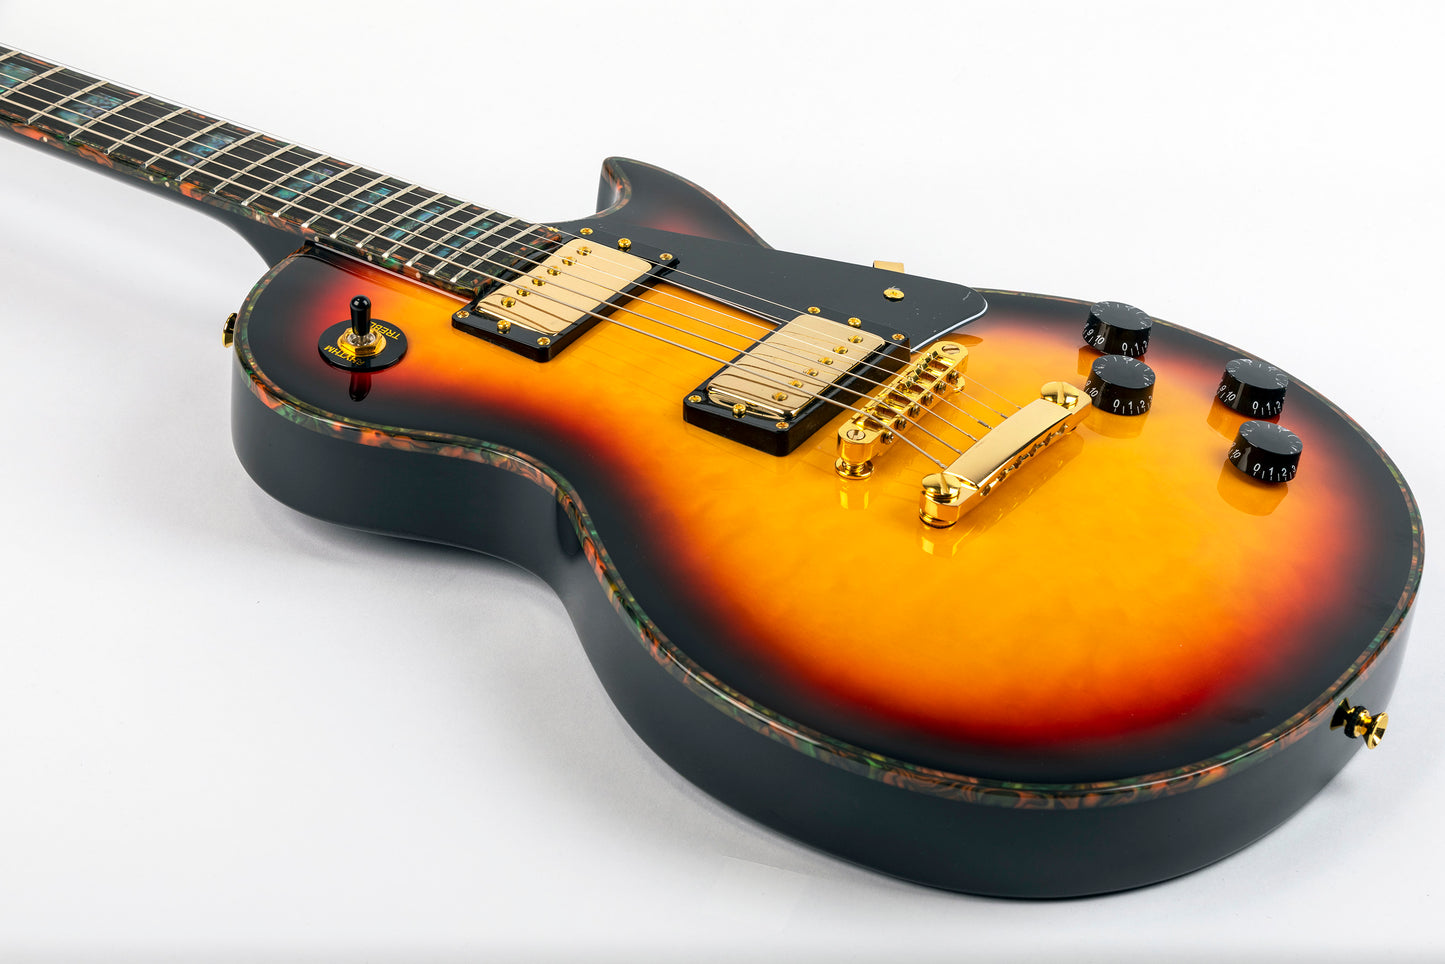 Allen Eden Southbound V2 3-Tone Sunburst with Abalone Binding and Inlays